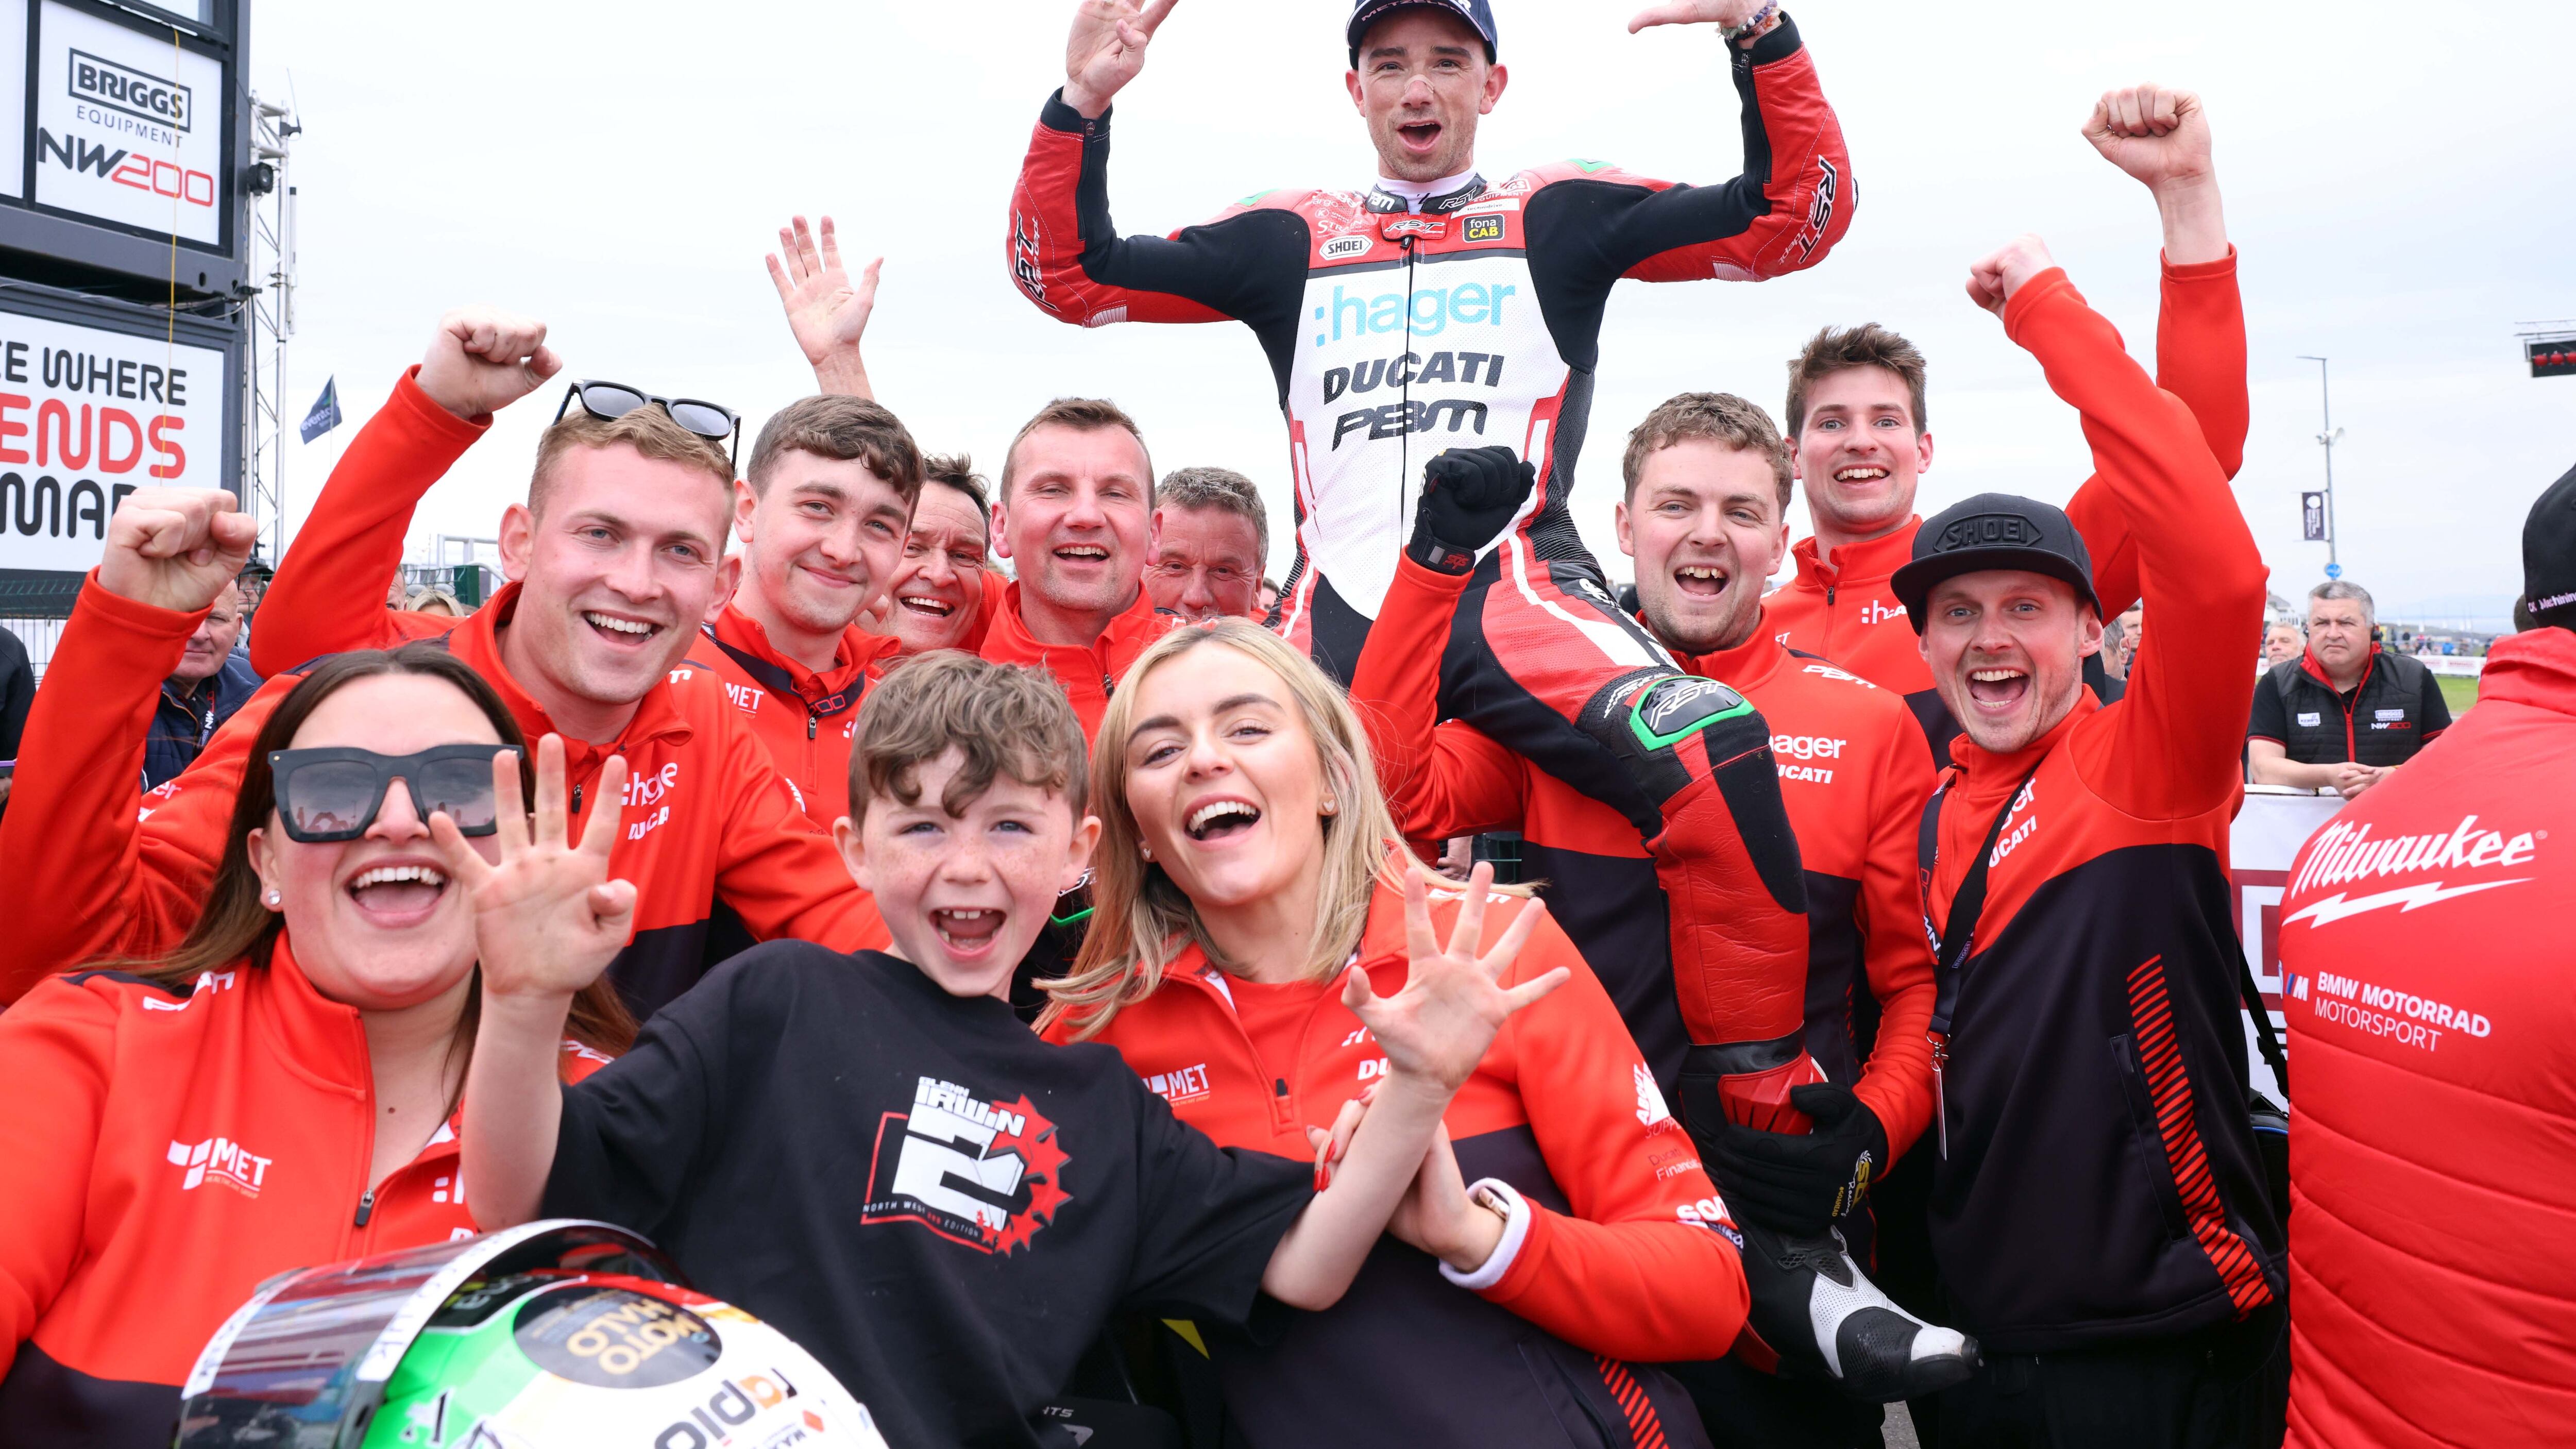 Glenn Irwin wins his ninth Superbike race in a row during the first evening of the NW200. He is congratulated son Freddie and his Ducati team.
Picture: Stephen Davison/Pacemaker Press